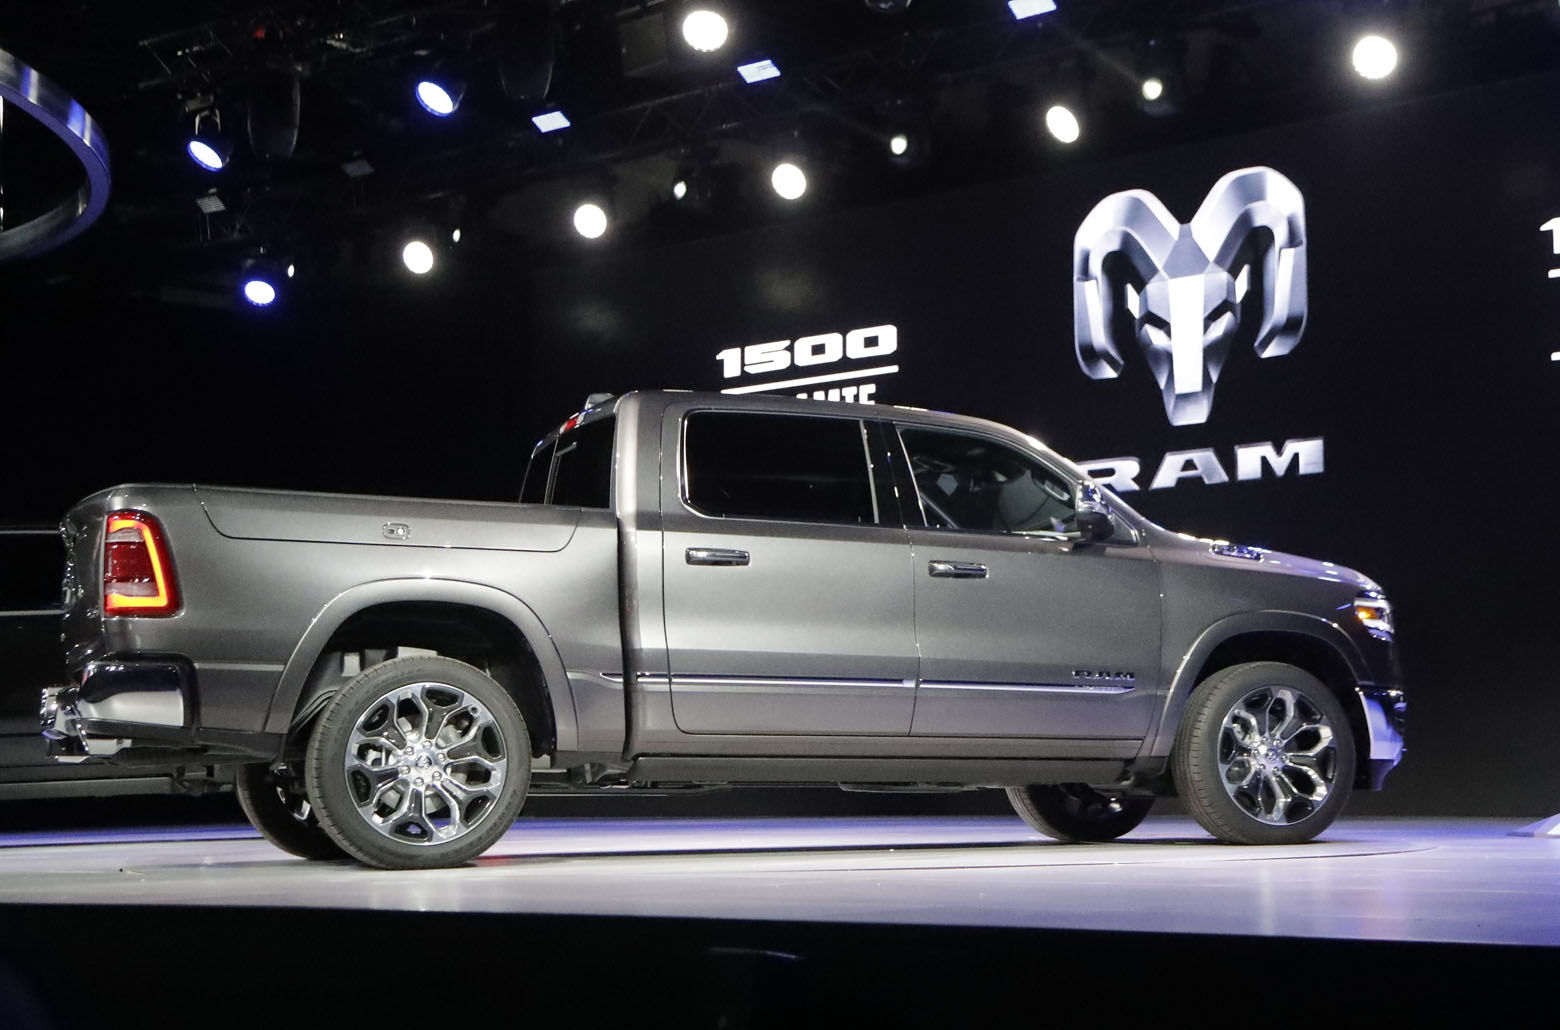 FILE- This Jan. 15, 2018, file photo shows the 2019 Ram 1500 at the North American International Auto Show in Detroit. Ram shook up the truck world a decade ago with a new rear suspension design that delivered sedan-like ride comfort without sacrificing capability. The rivals have since caught up, but the new Ram, thoroughly overhauled for 2019 and now on sale, continues to innovate. (AP Photo/Carlos Osorio, File)